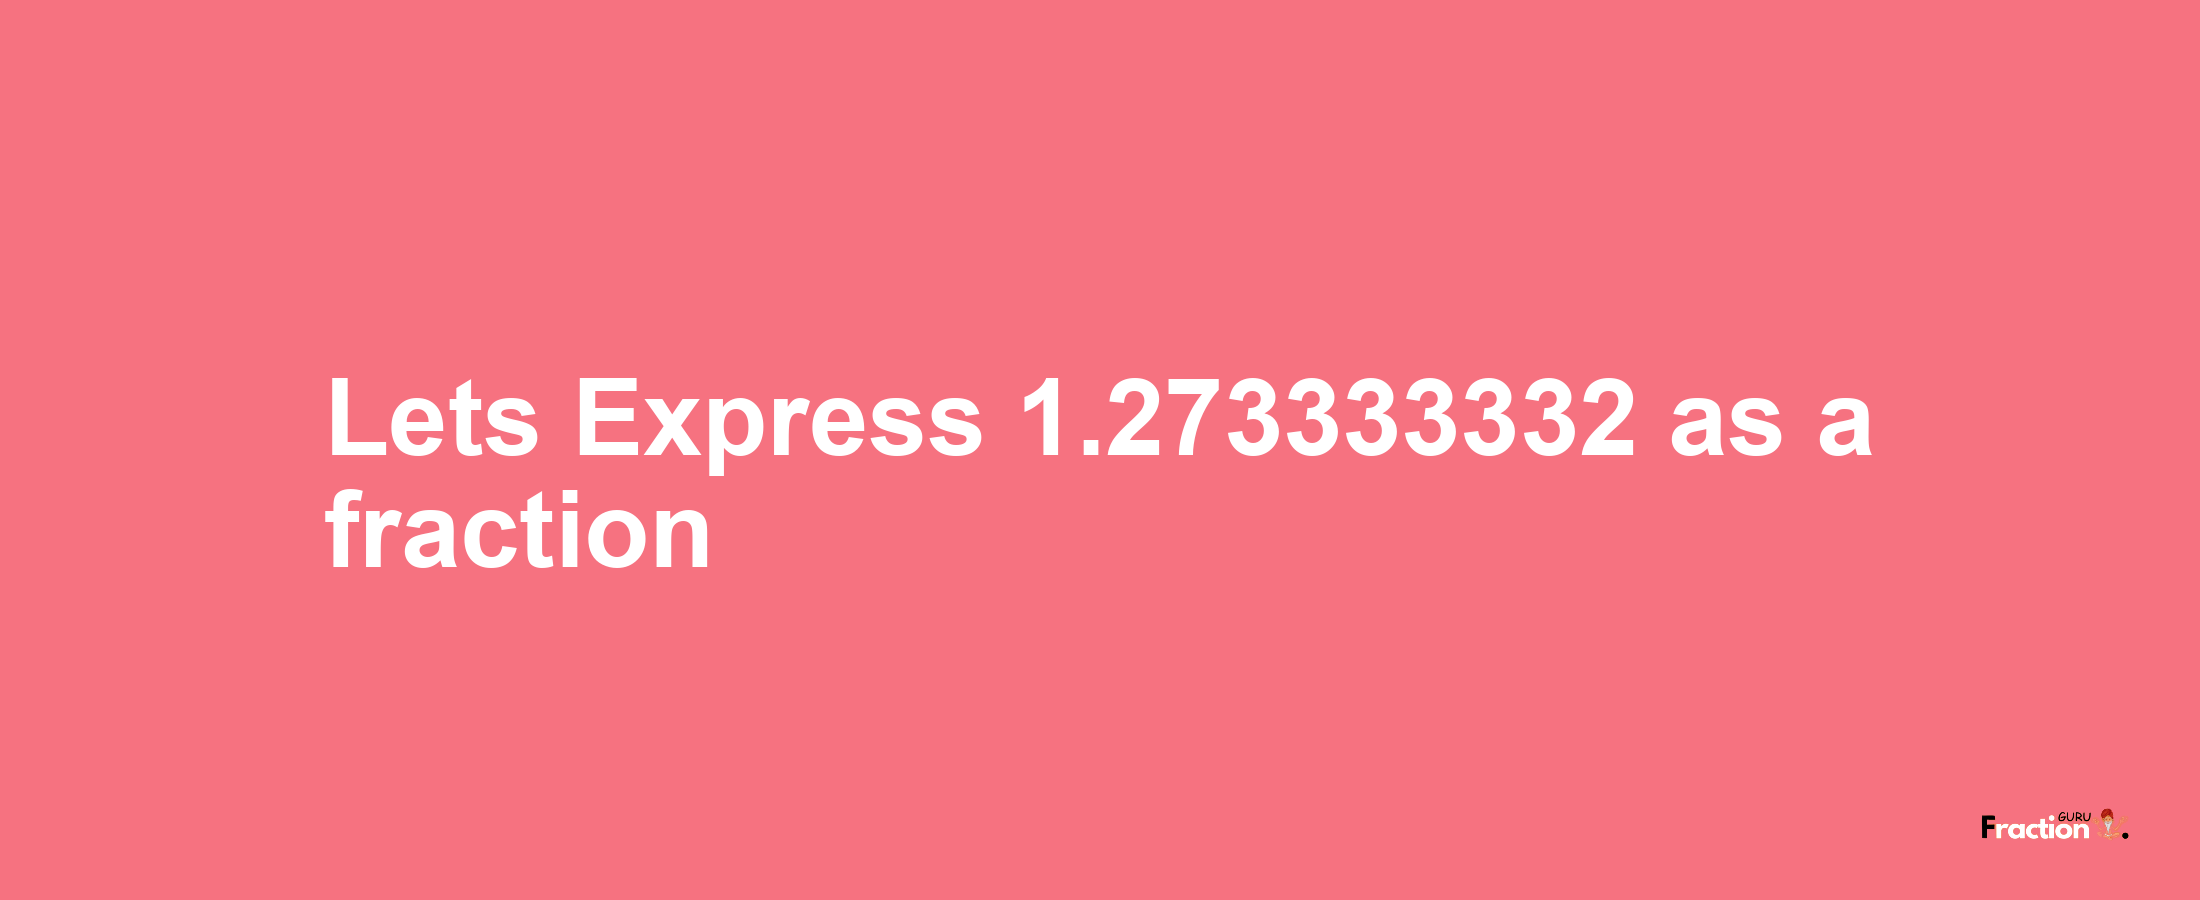 Lets Express 1.273333332 as afraction